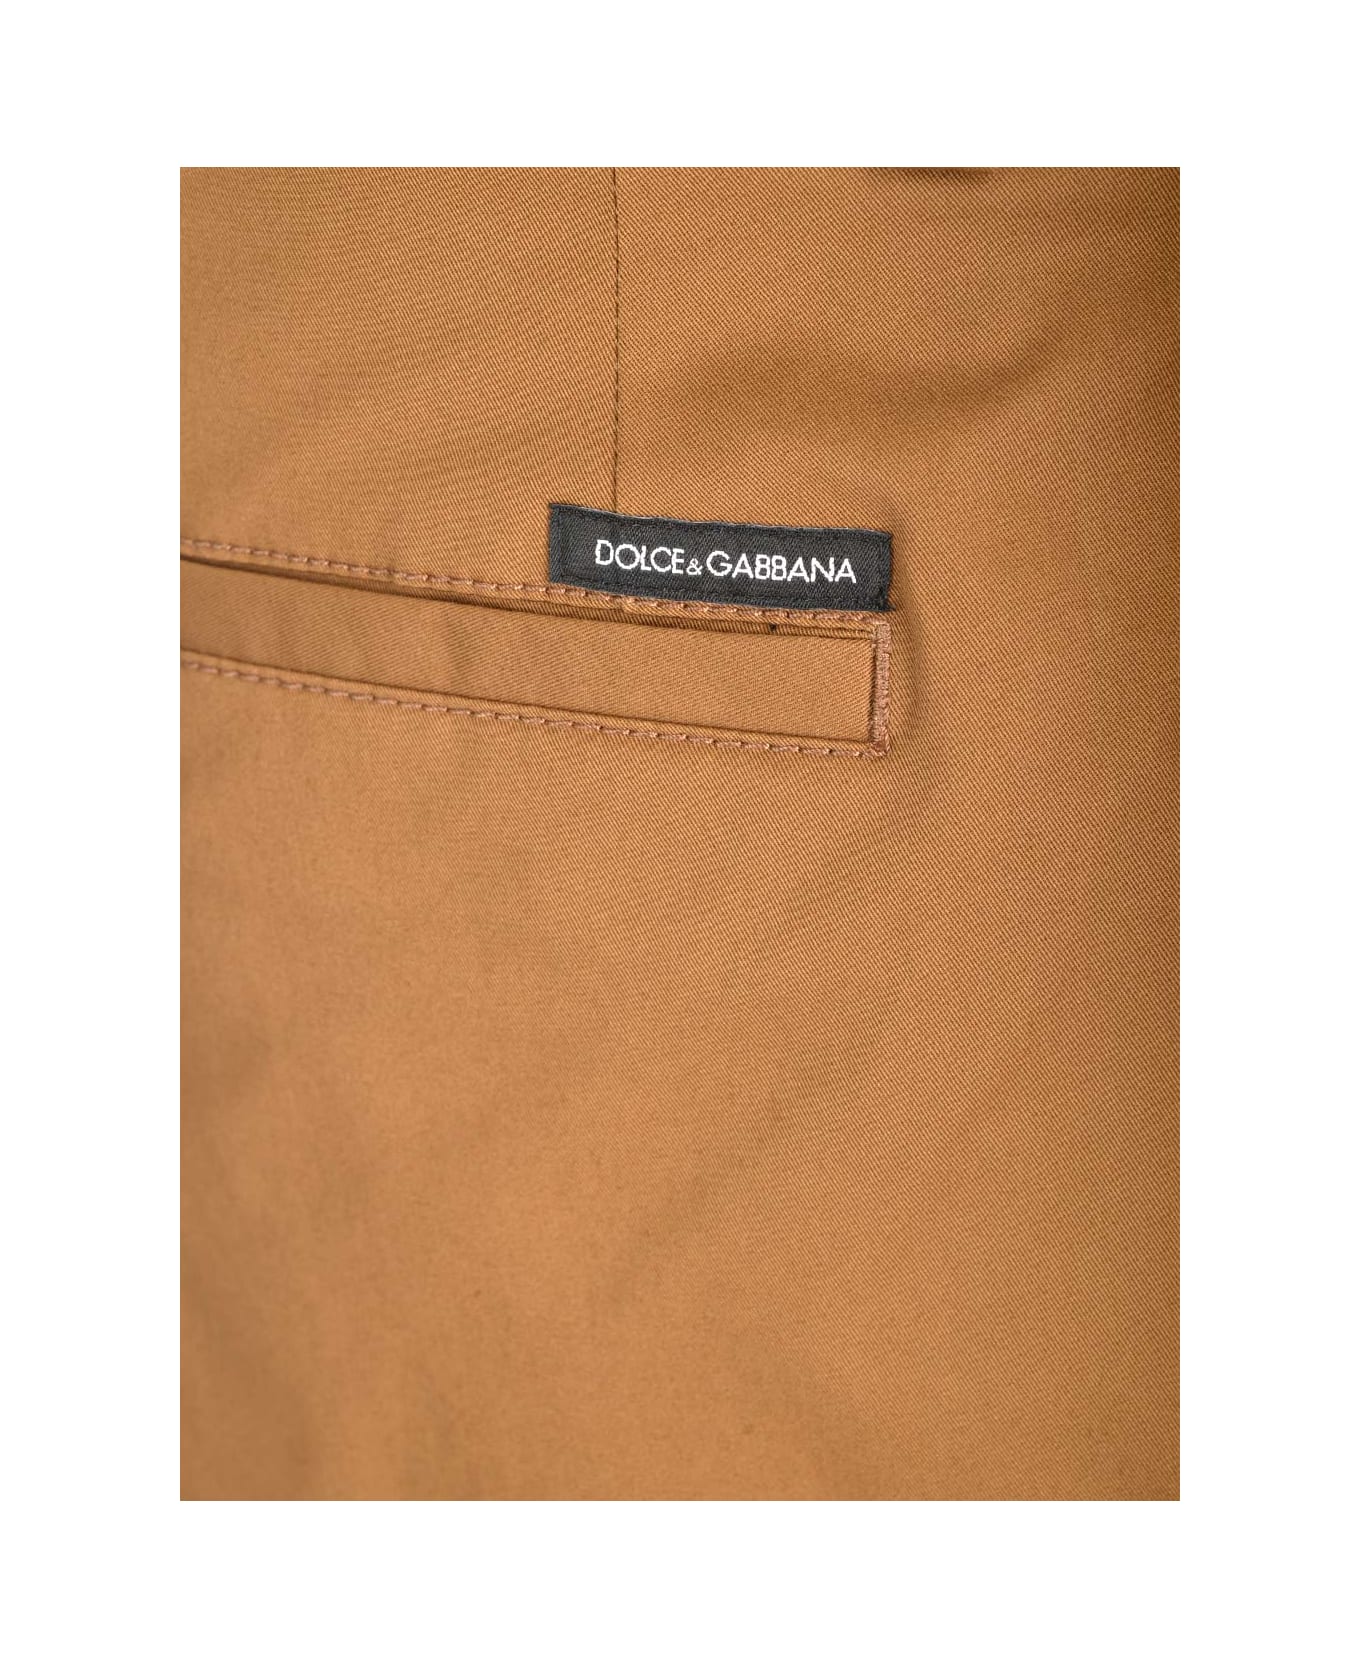 Dolce & Gabbana Roma Trousers - Brown ボトムス